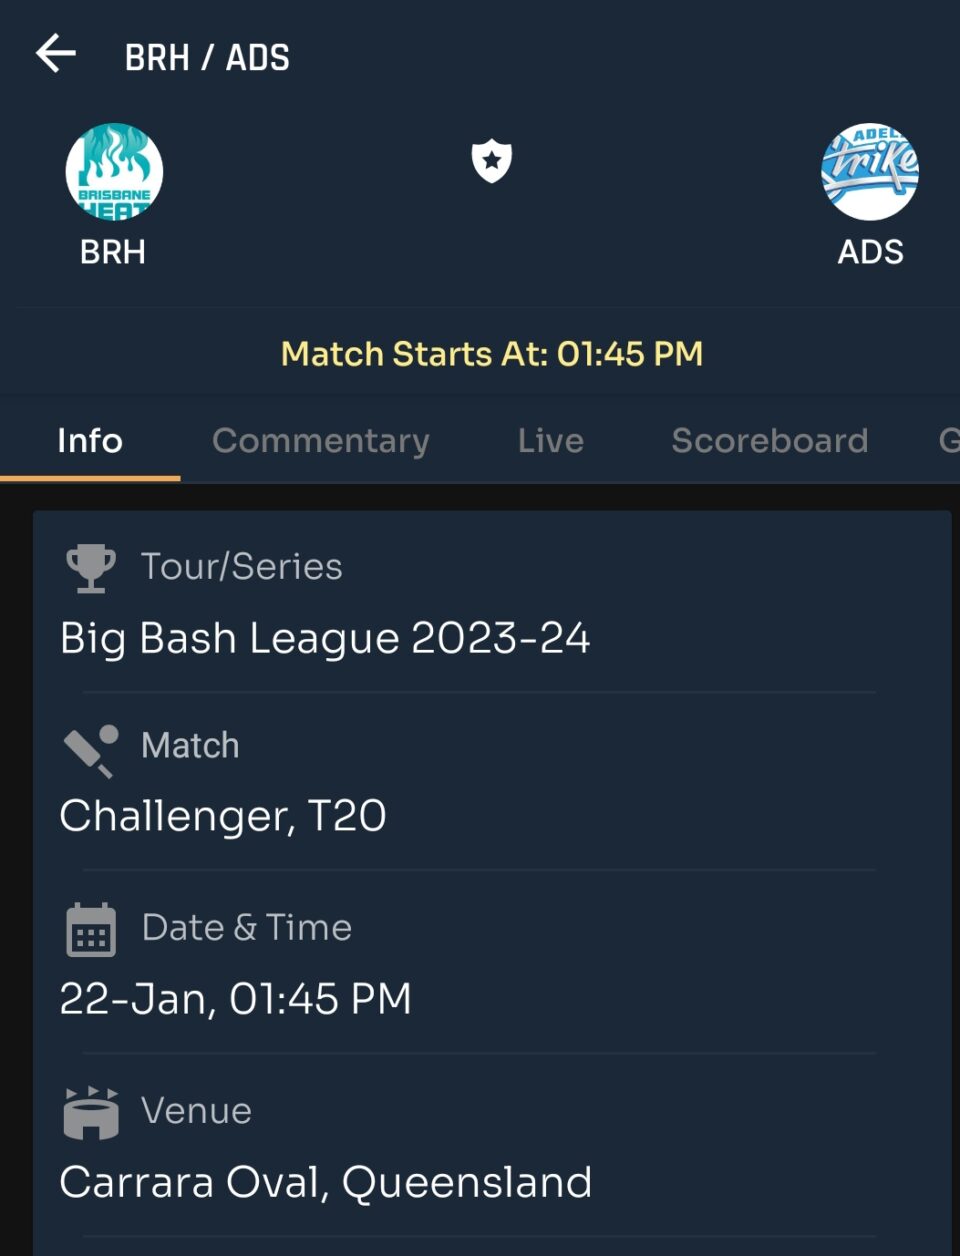 Today BBL Match Challenger Prediction |BRH vs ADS| Toss and Match Analysis | Pitch & Weather Report